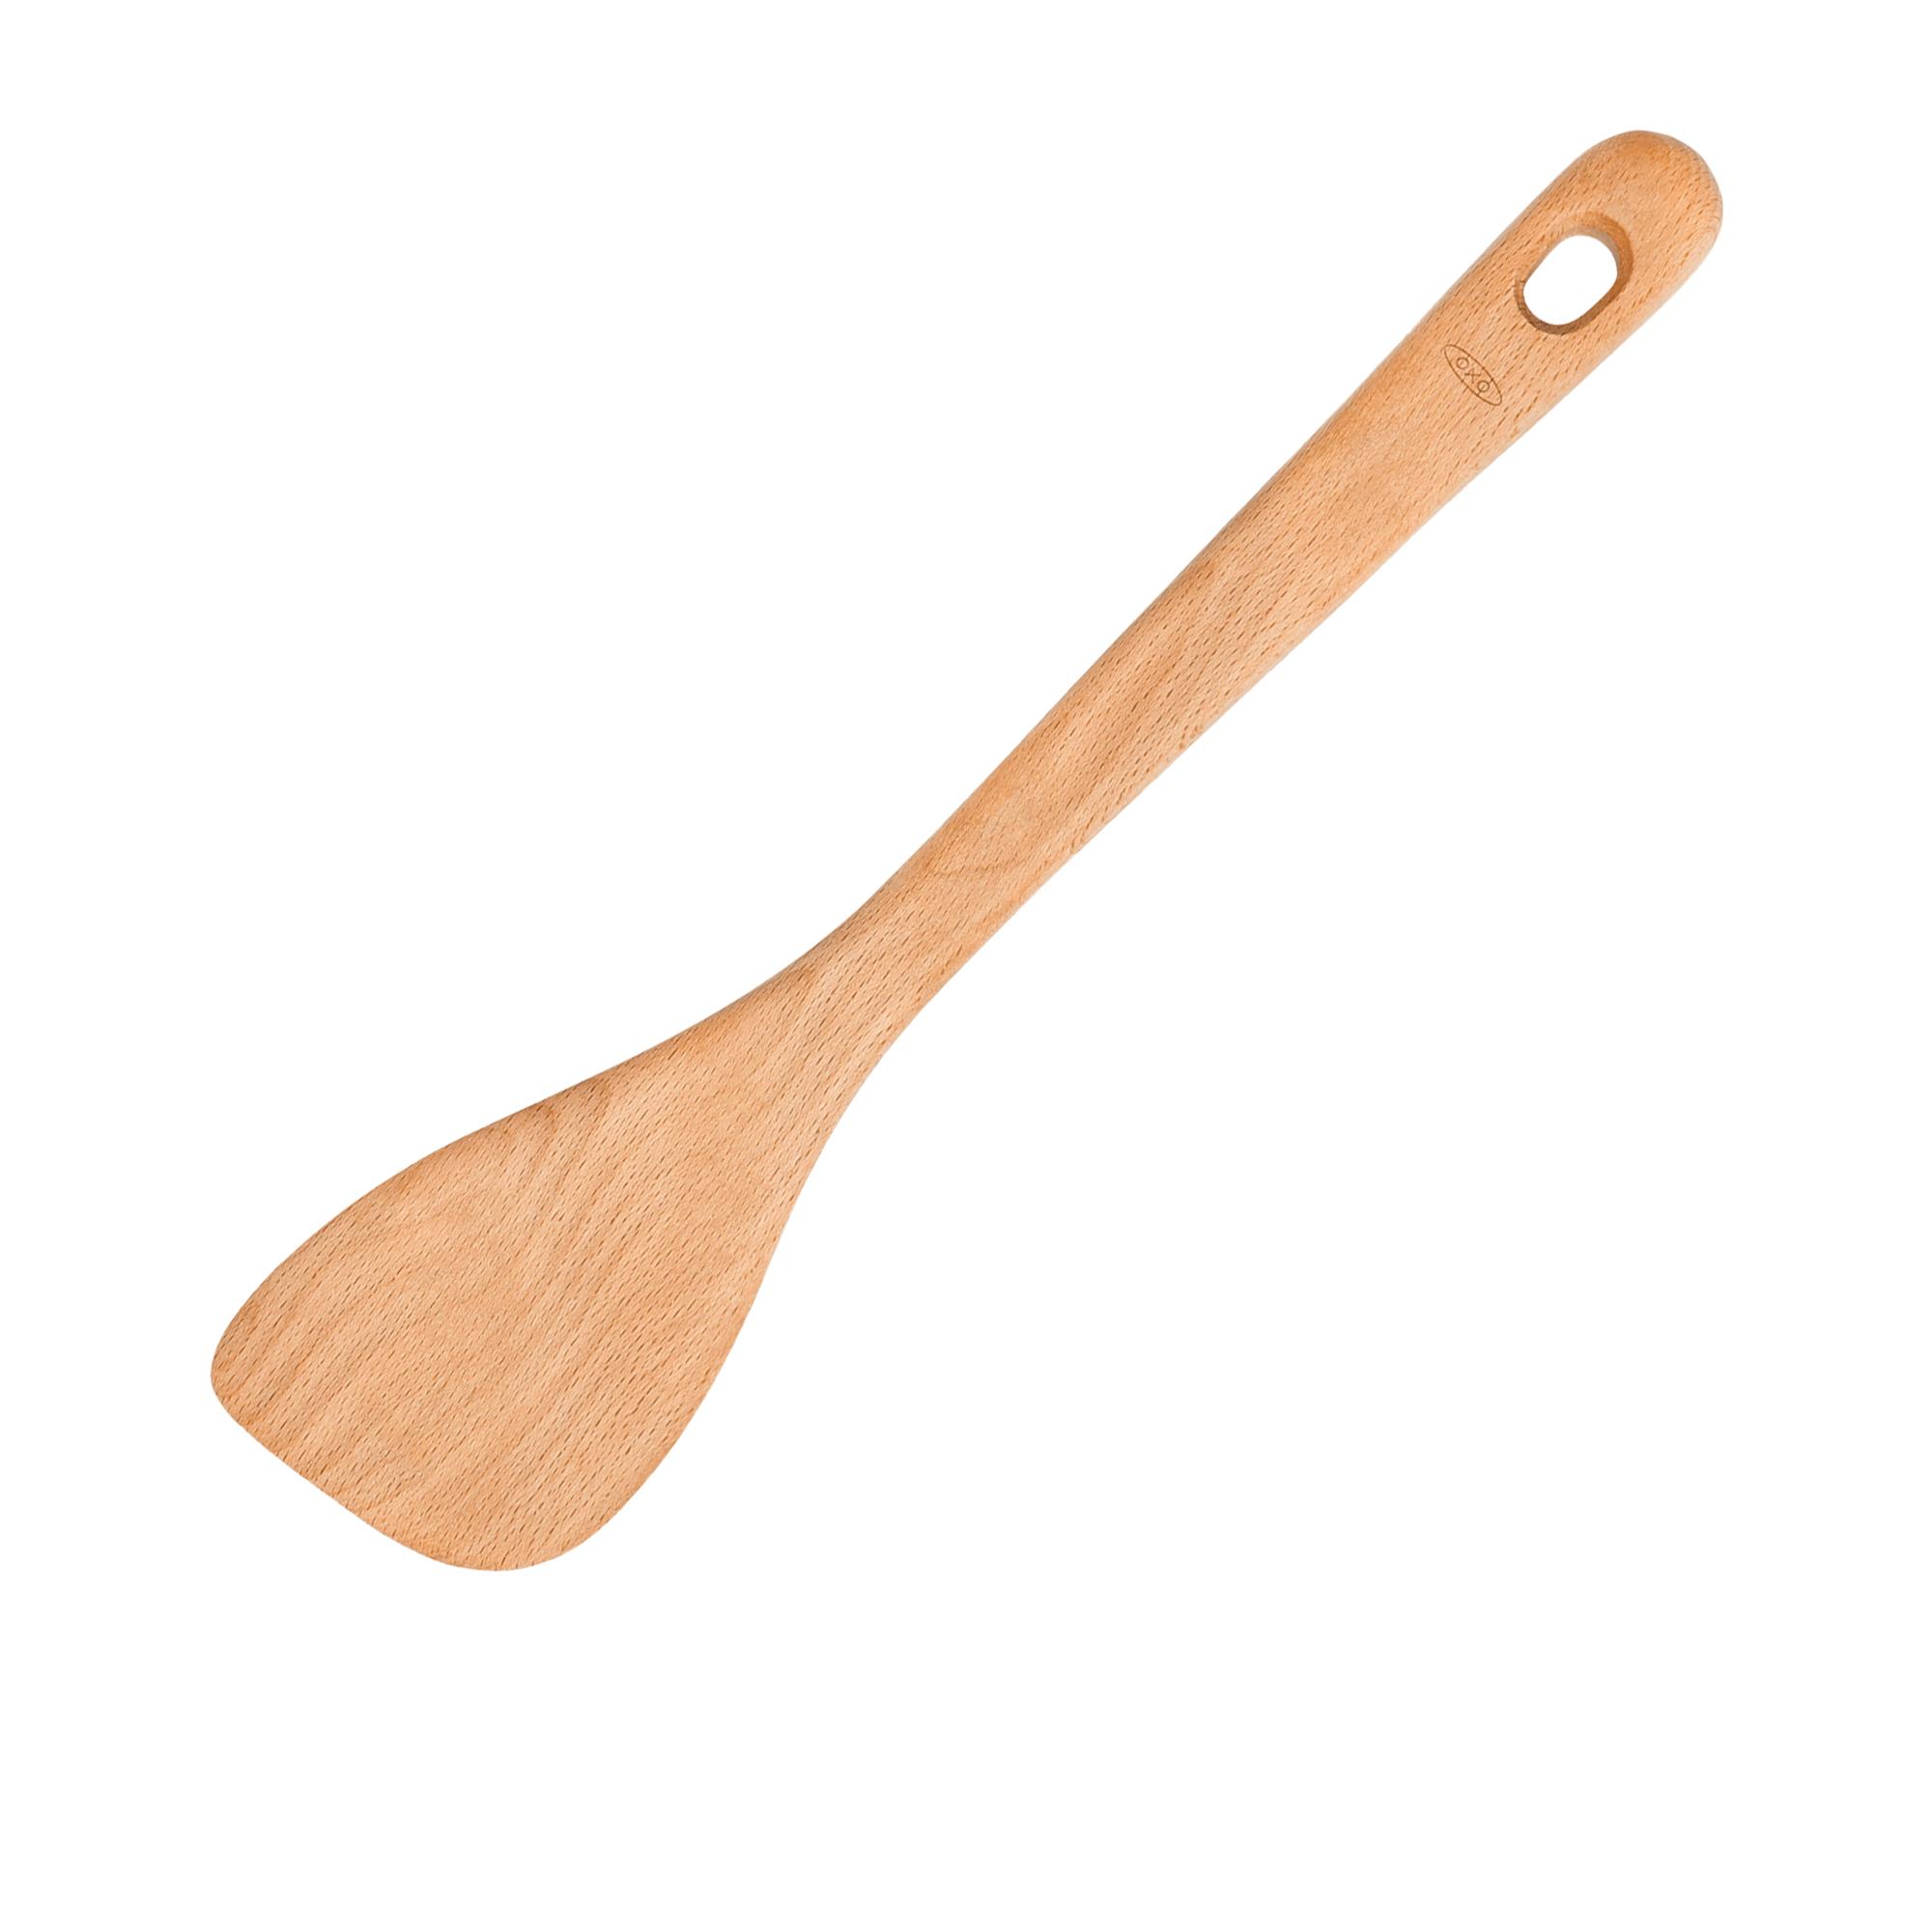 OXO Good Grips Wooden Saute Paddle Image 1